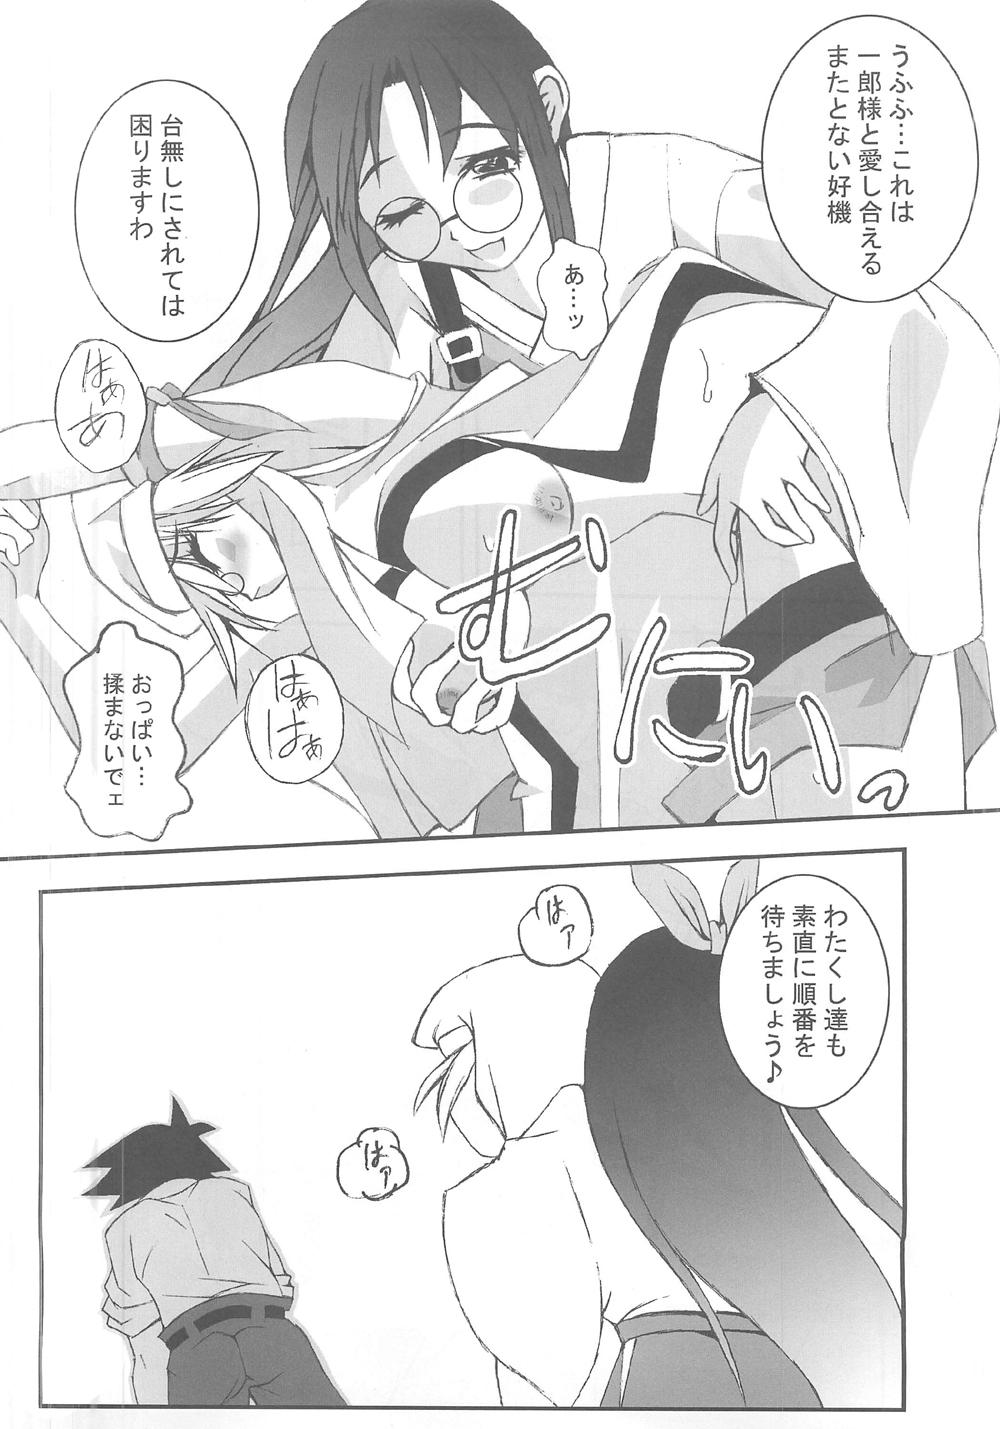 Long 供養⑤ - G on riders Mouth - Page 6